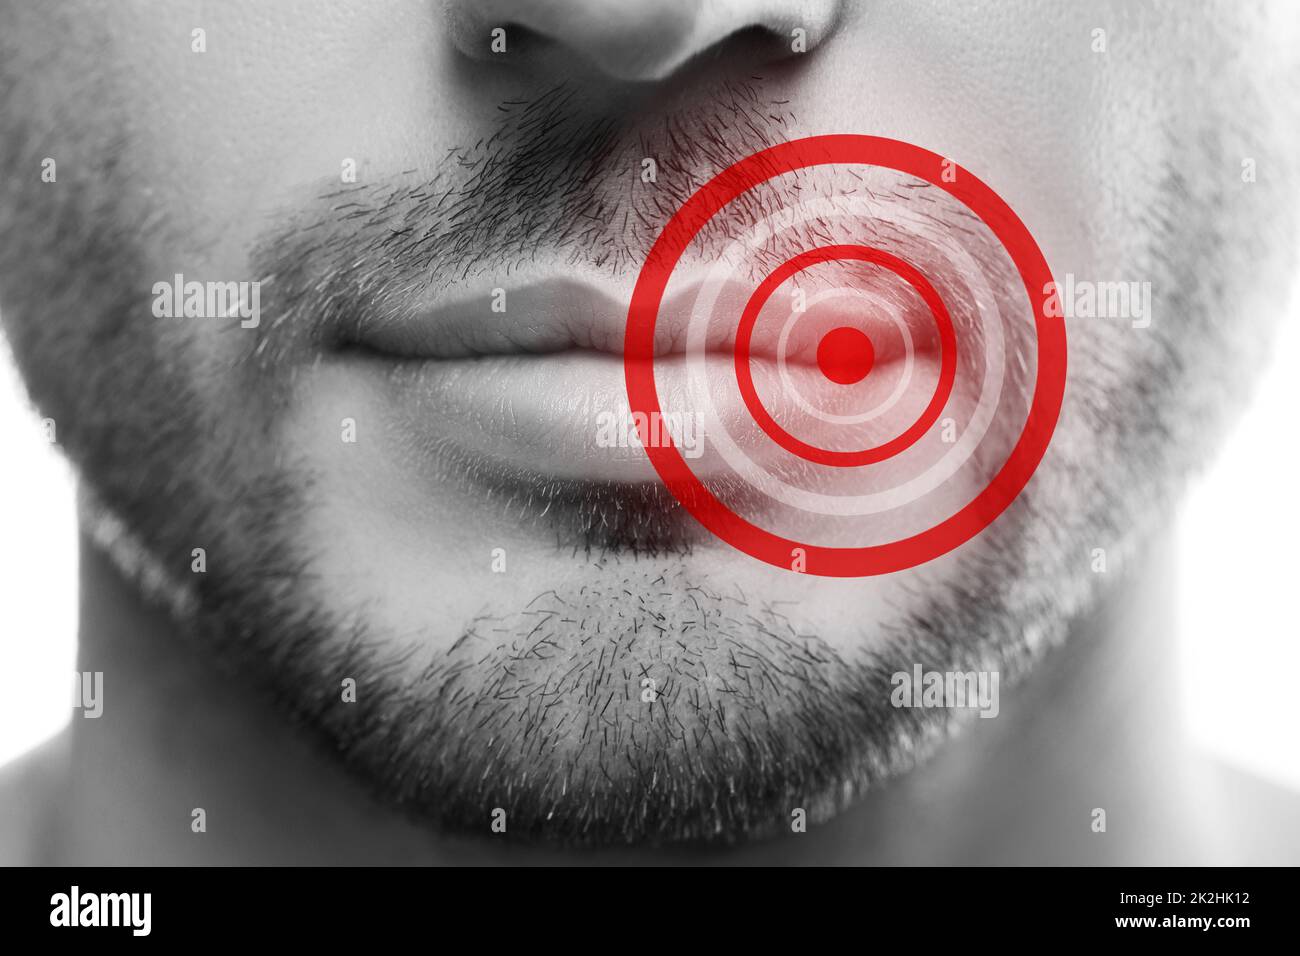 Male lips with a red circles. Signal of problems such as cold sores. Stock Photo